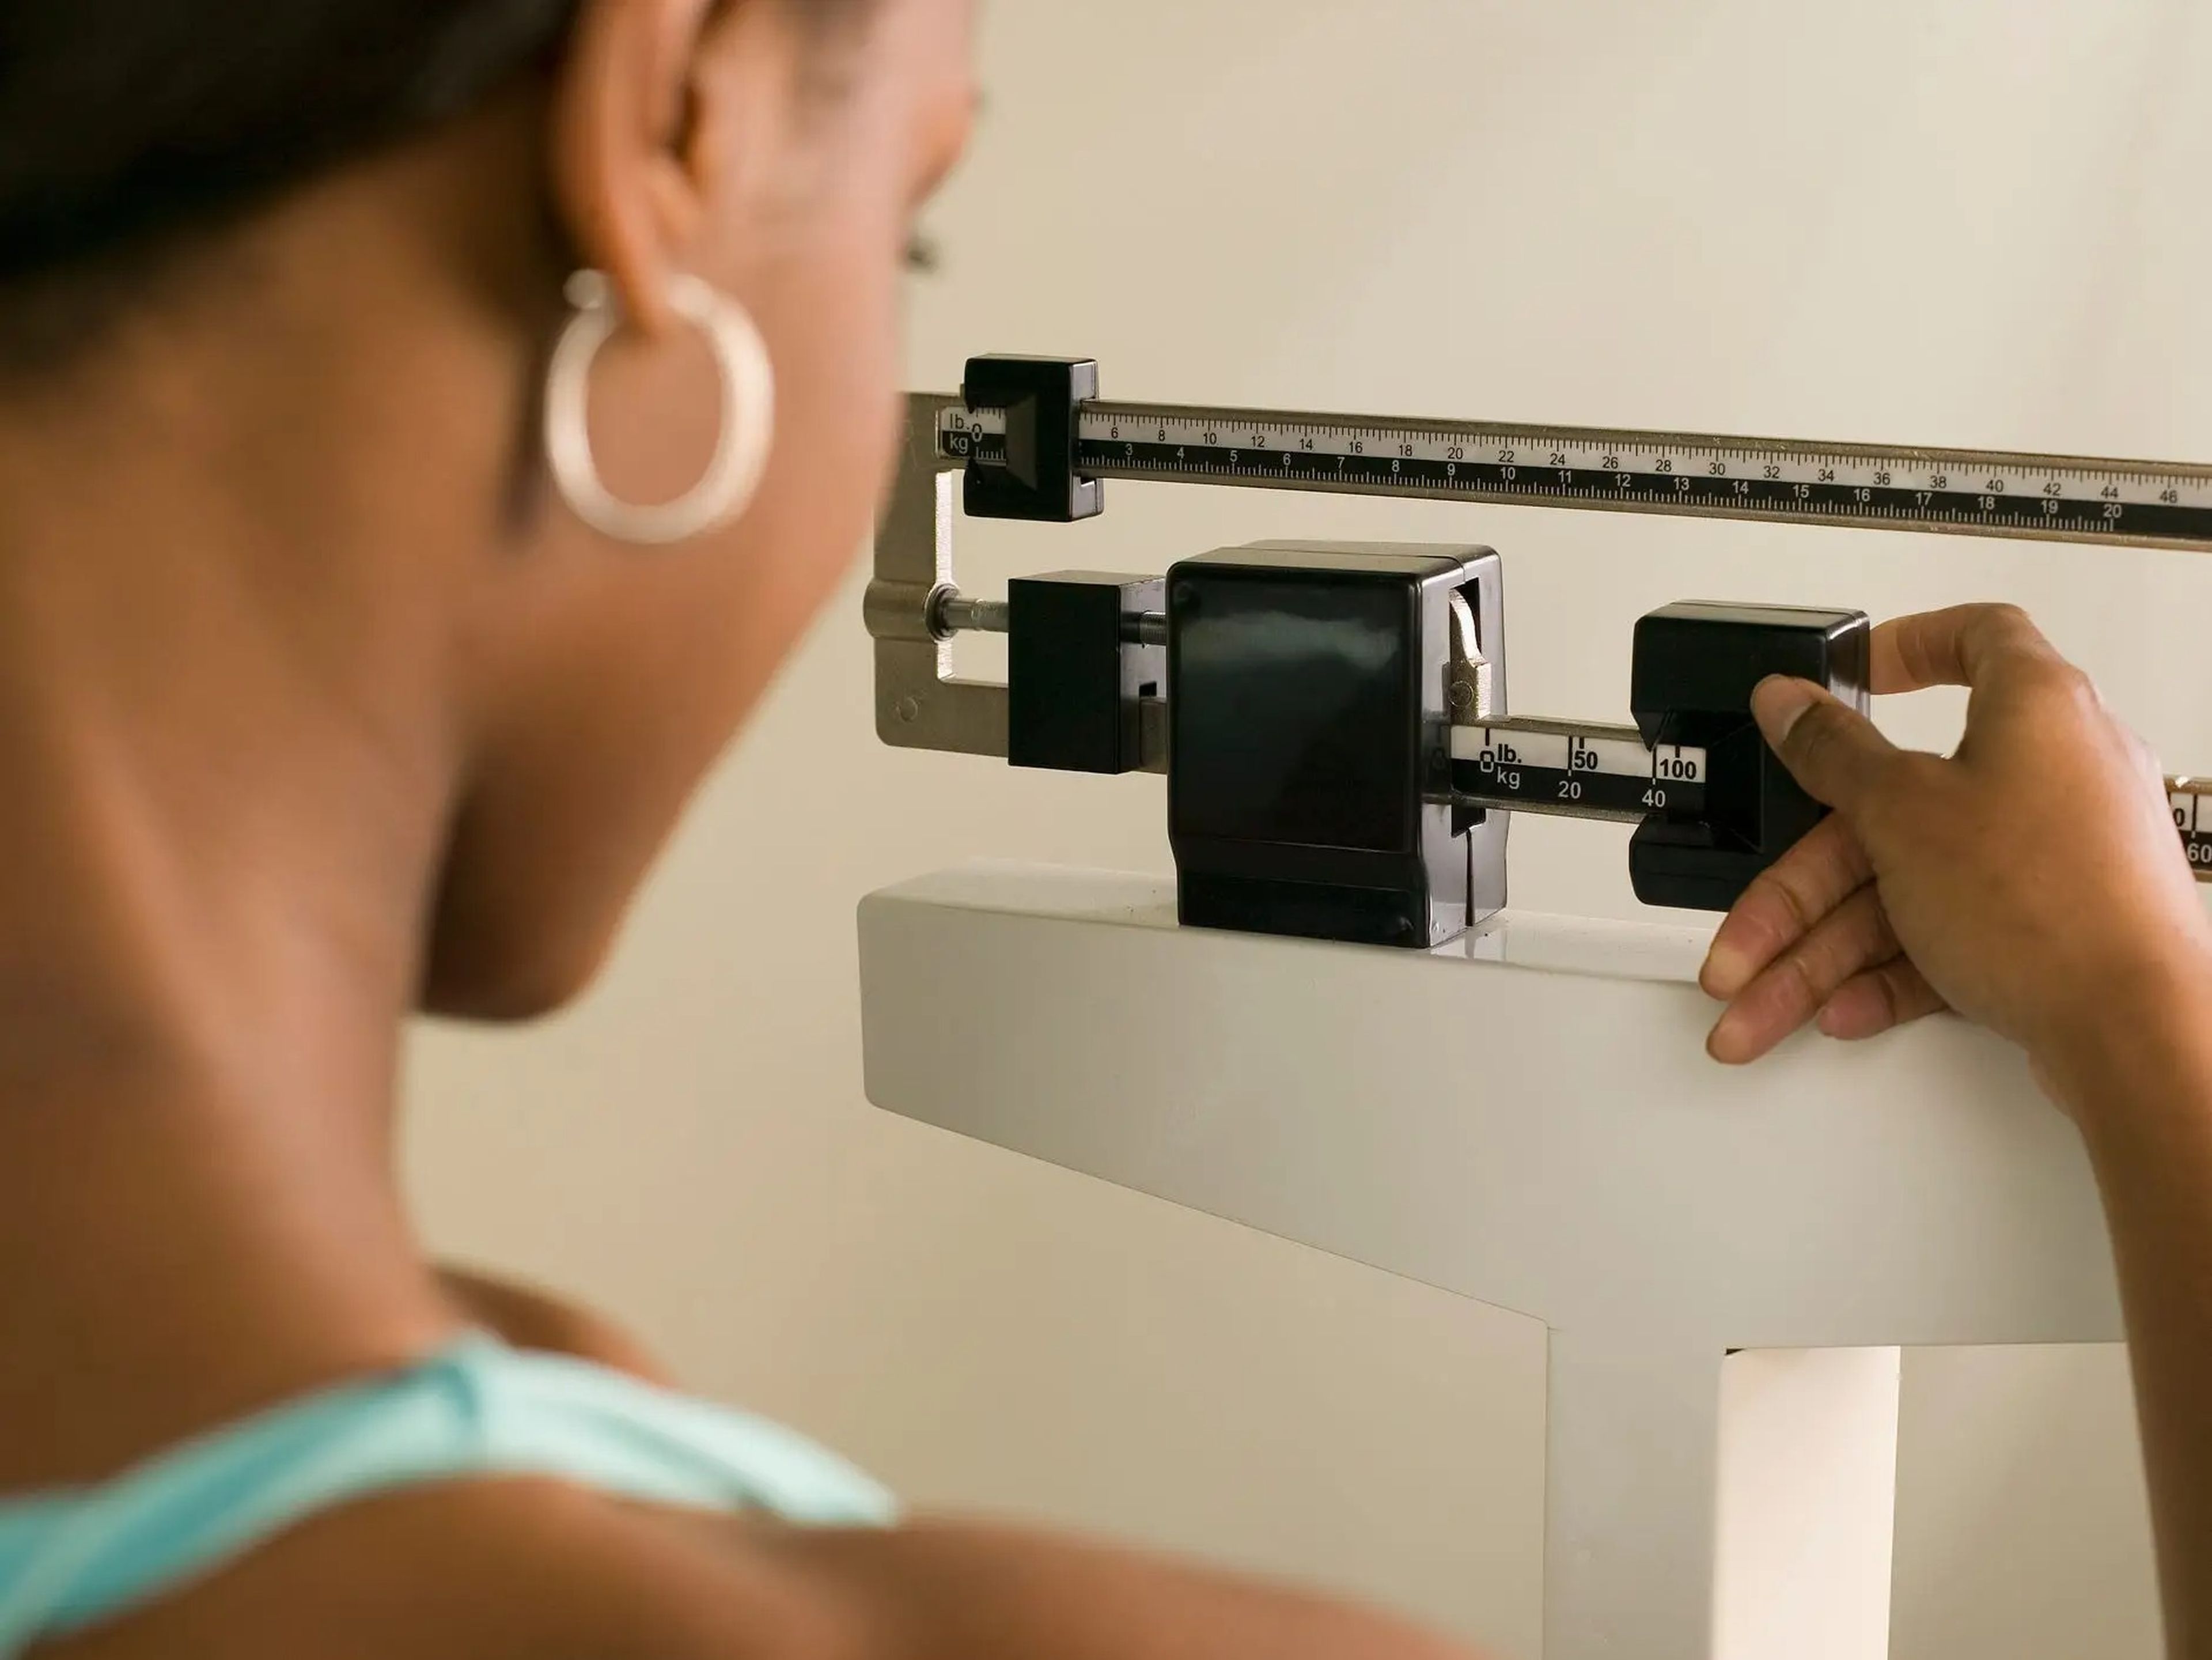 While BMI is an imperfect measure of health, higher ranges may be reason to get screened for colon cancer.